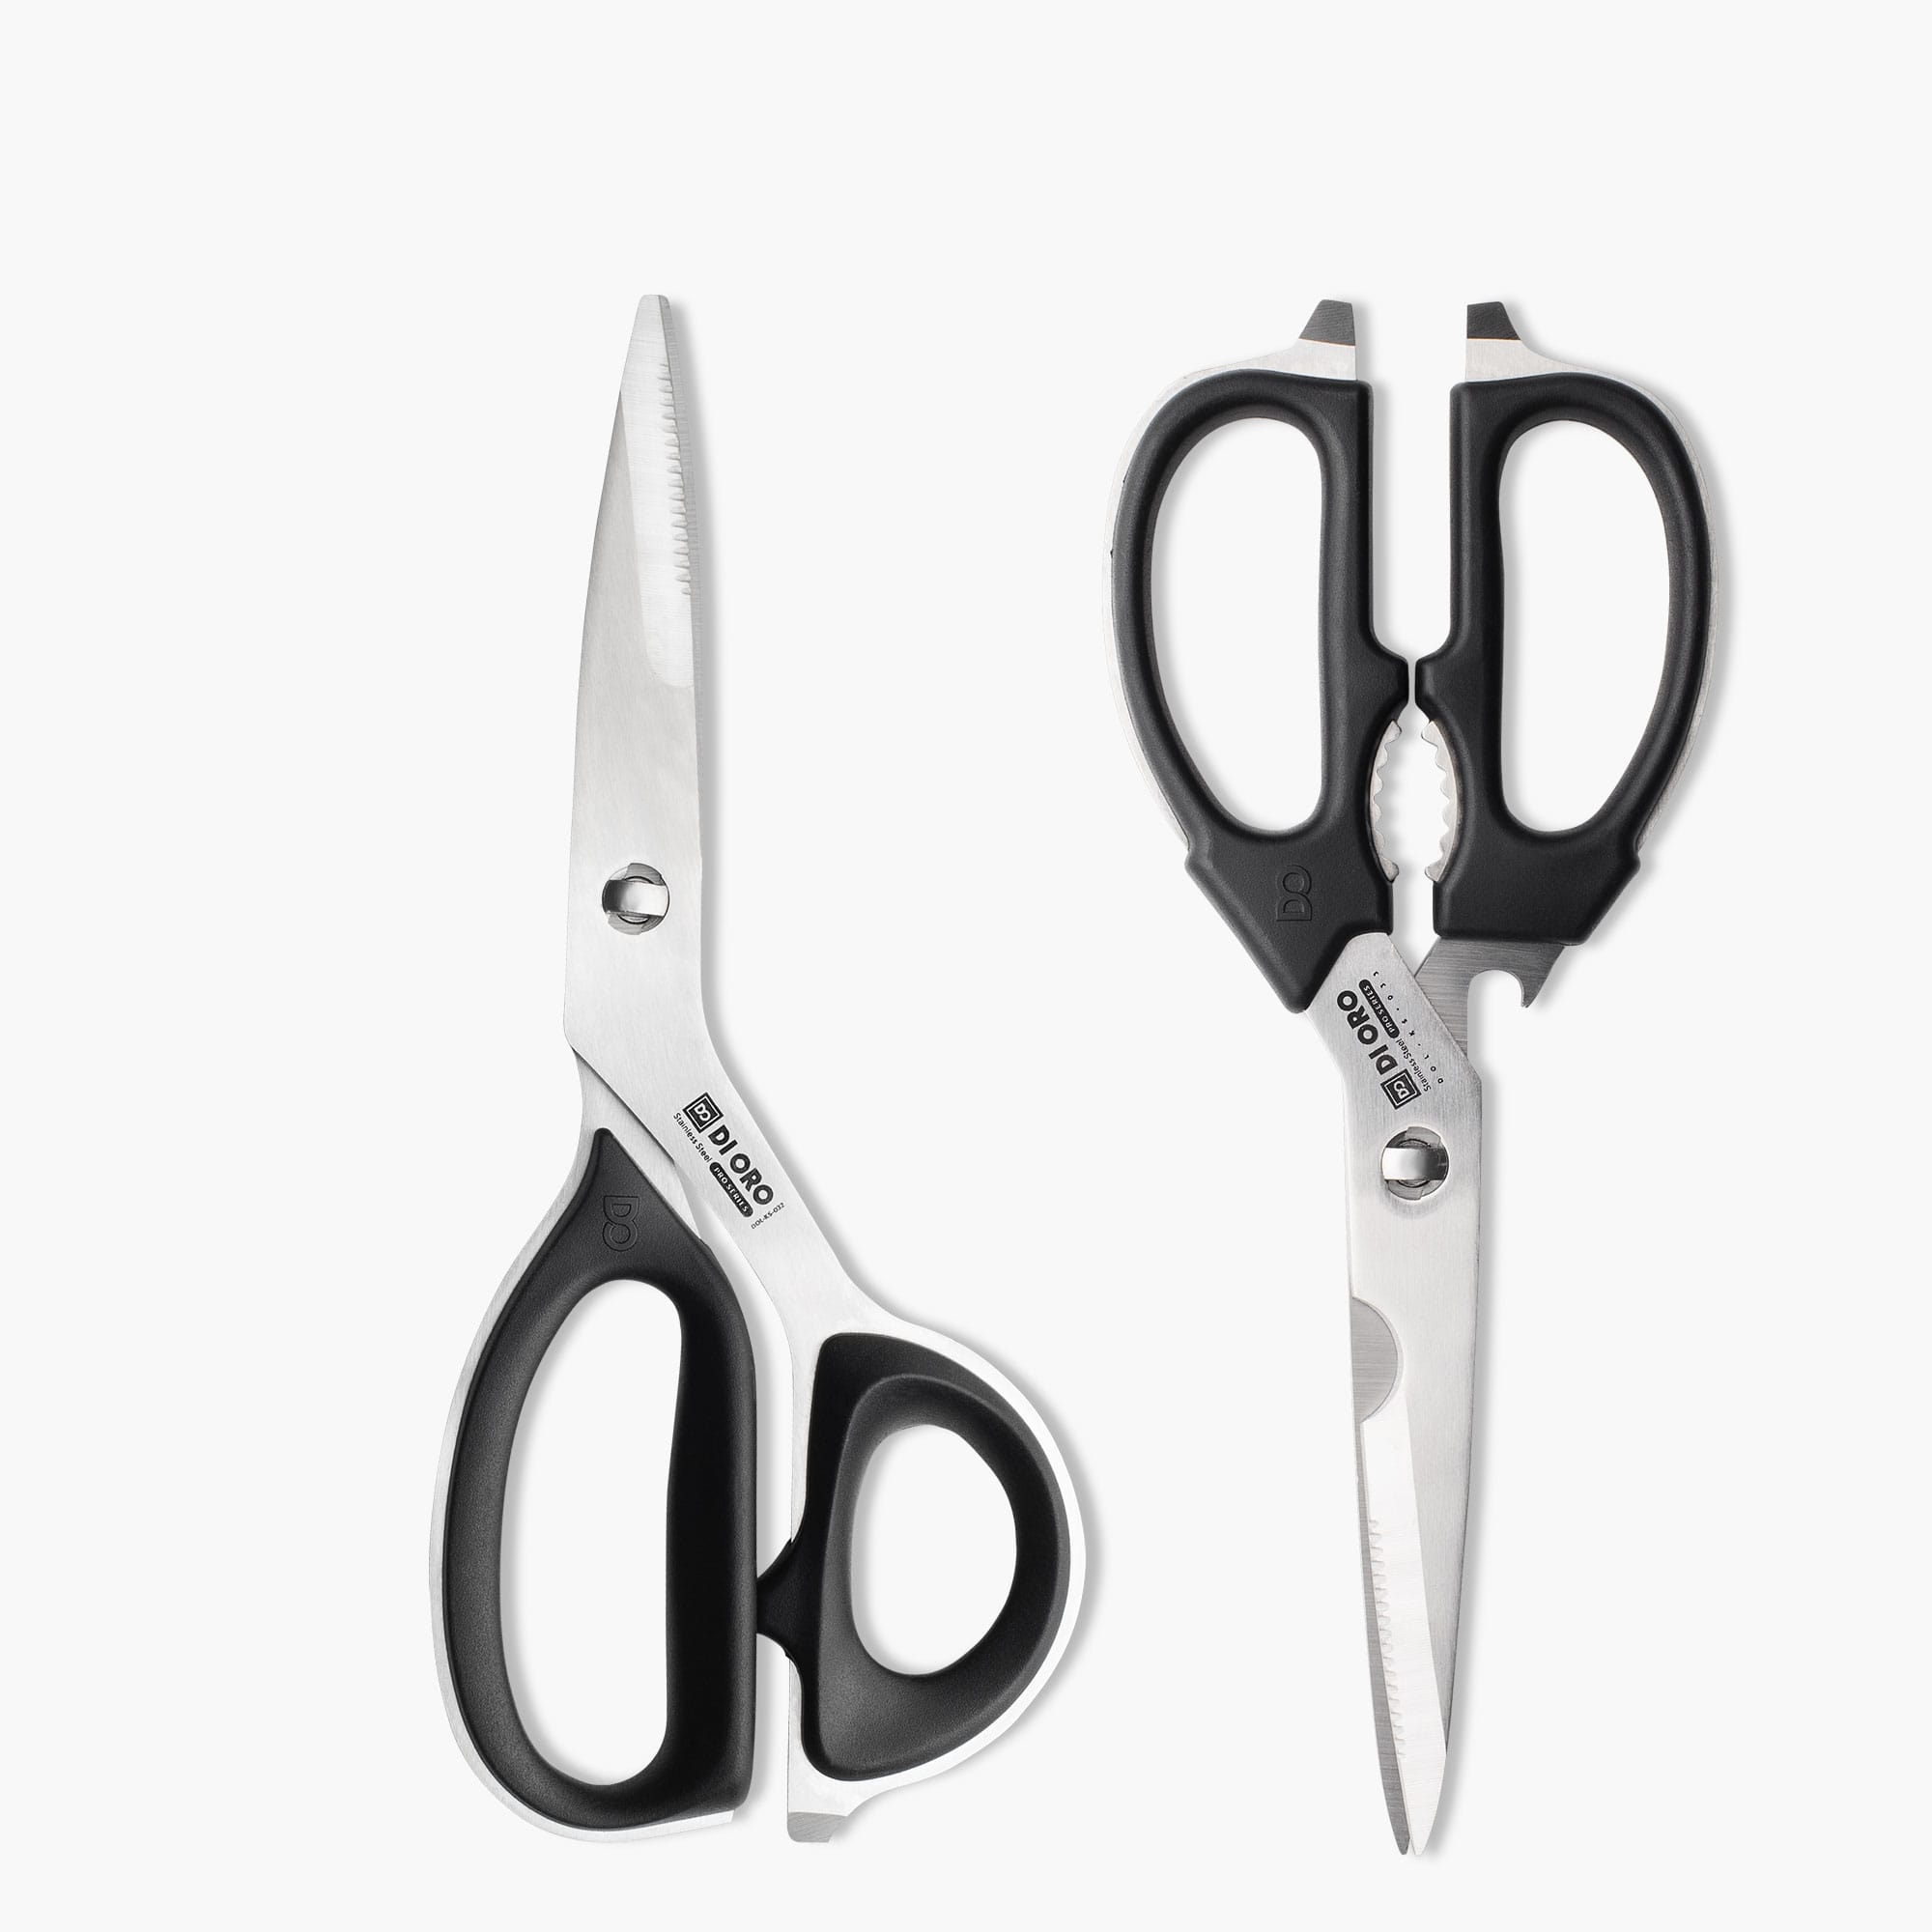 di Oro Stainless Steel Kitchen Scissors - Heavy Duty Come-Apart Kitchen Shears for Poultry, Meat, Herb Cutting and More - Multi-Purpose and Offs